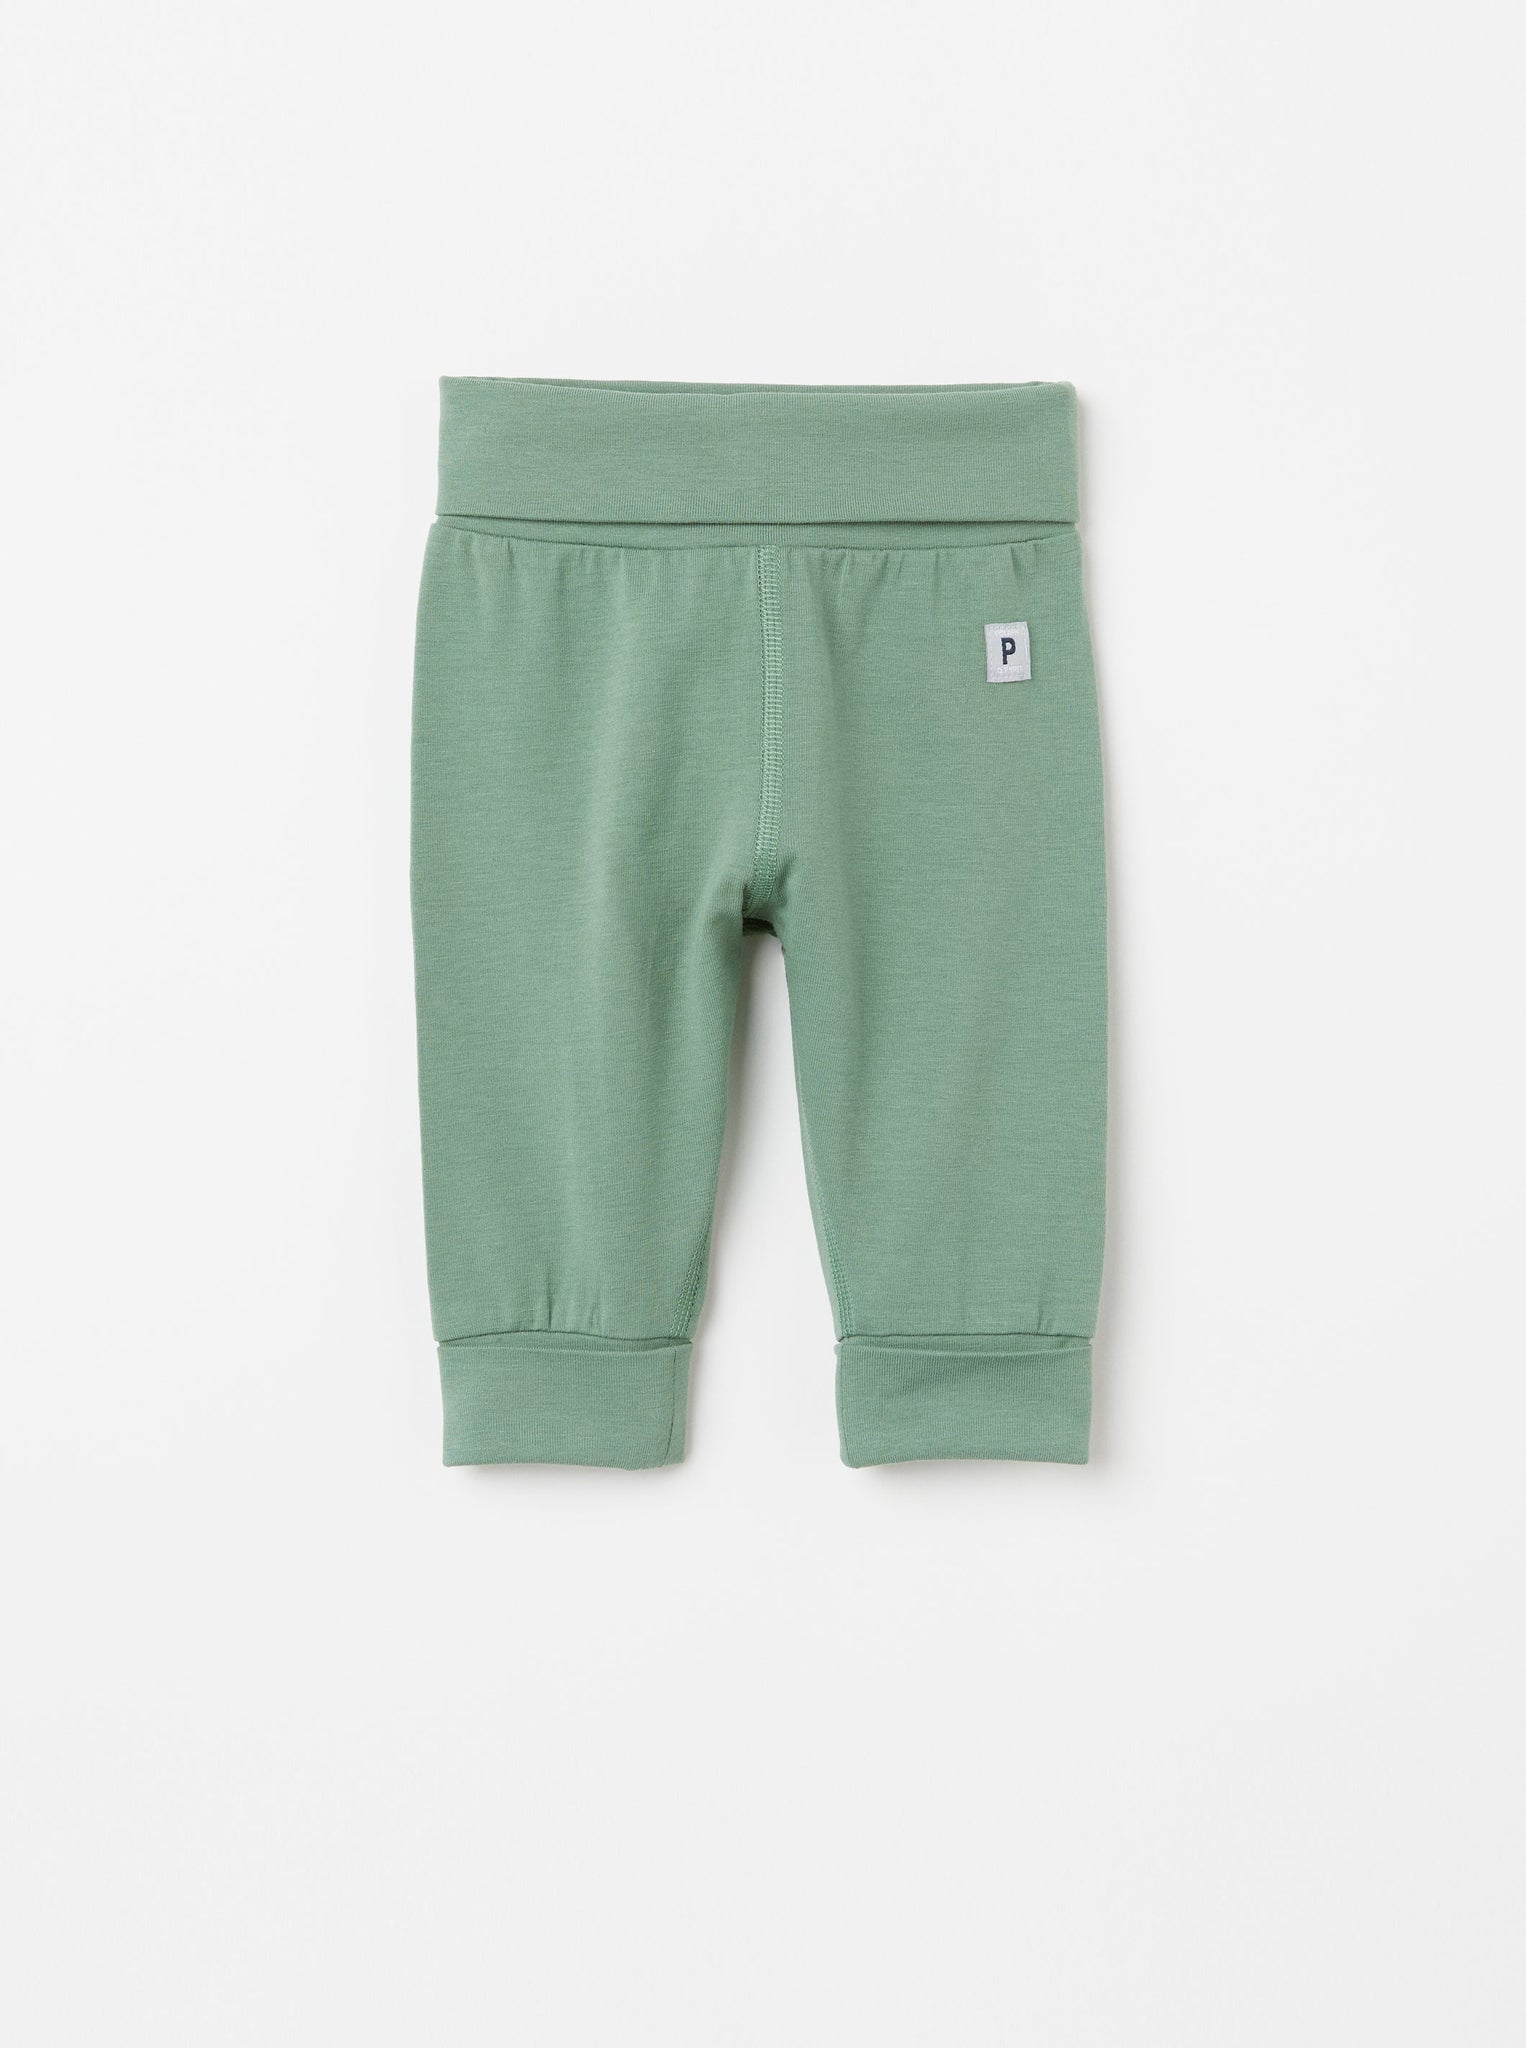 Organic Cotton Green Baby Leggings from the Polarn O. Pyret Kidswear collection. Nordic kids clothes made from sustainable sources.